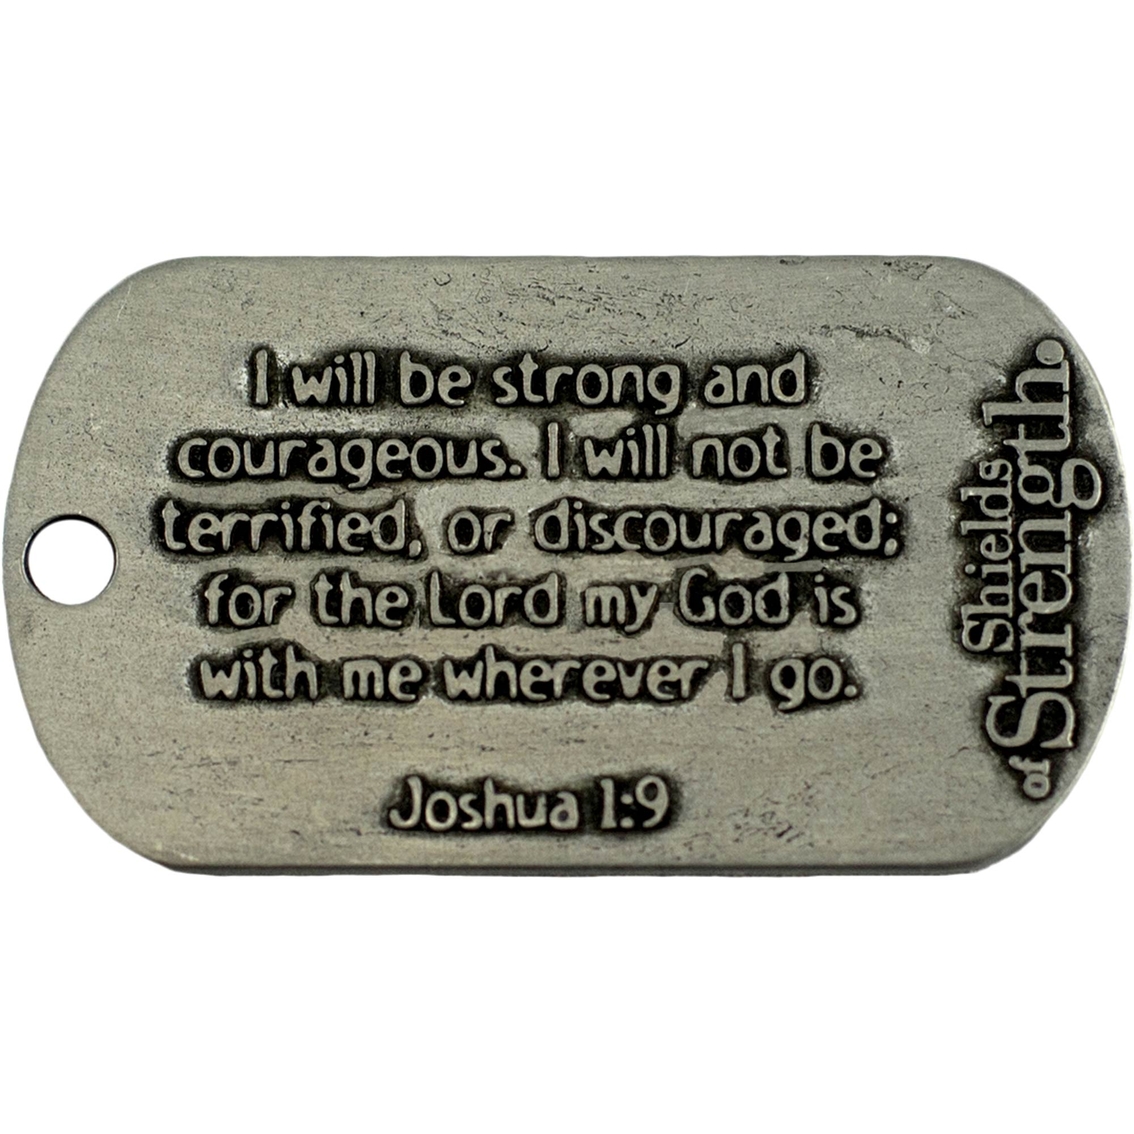 Shields of Strength Military Dad Antique Finish Dog Tag Necklace, Joshua 1:9 - Image 2 of 2